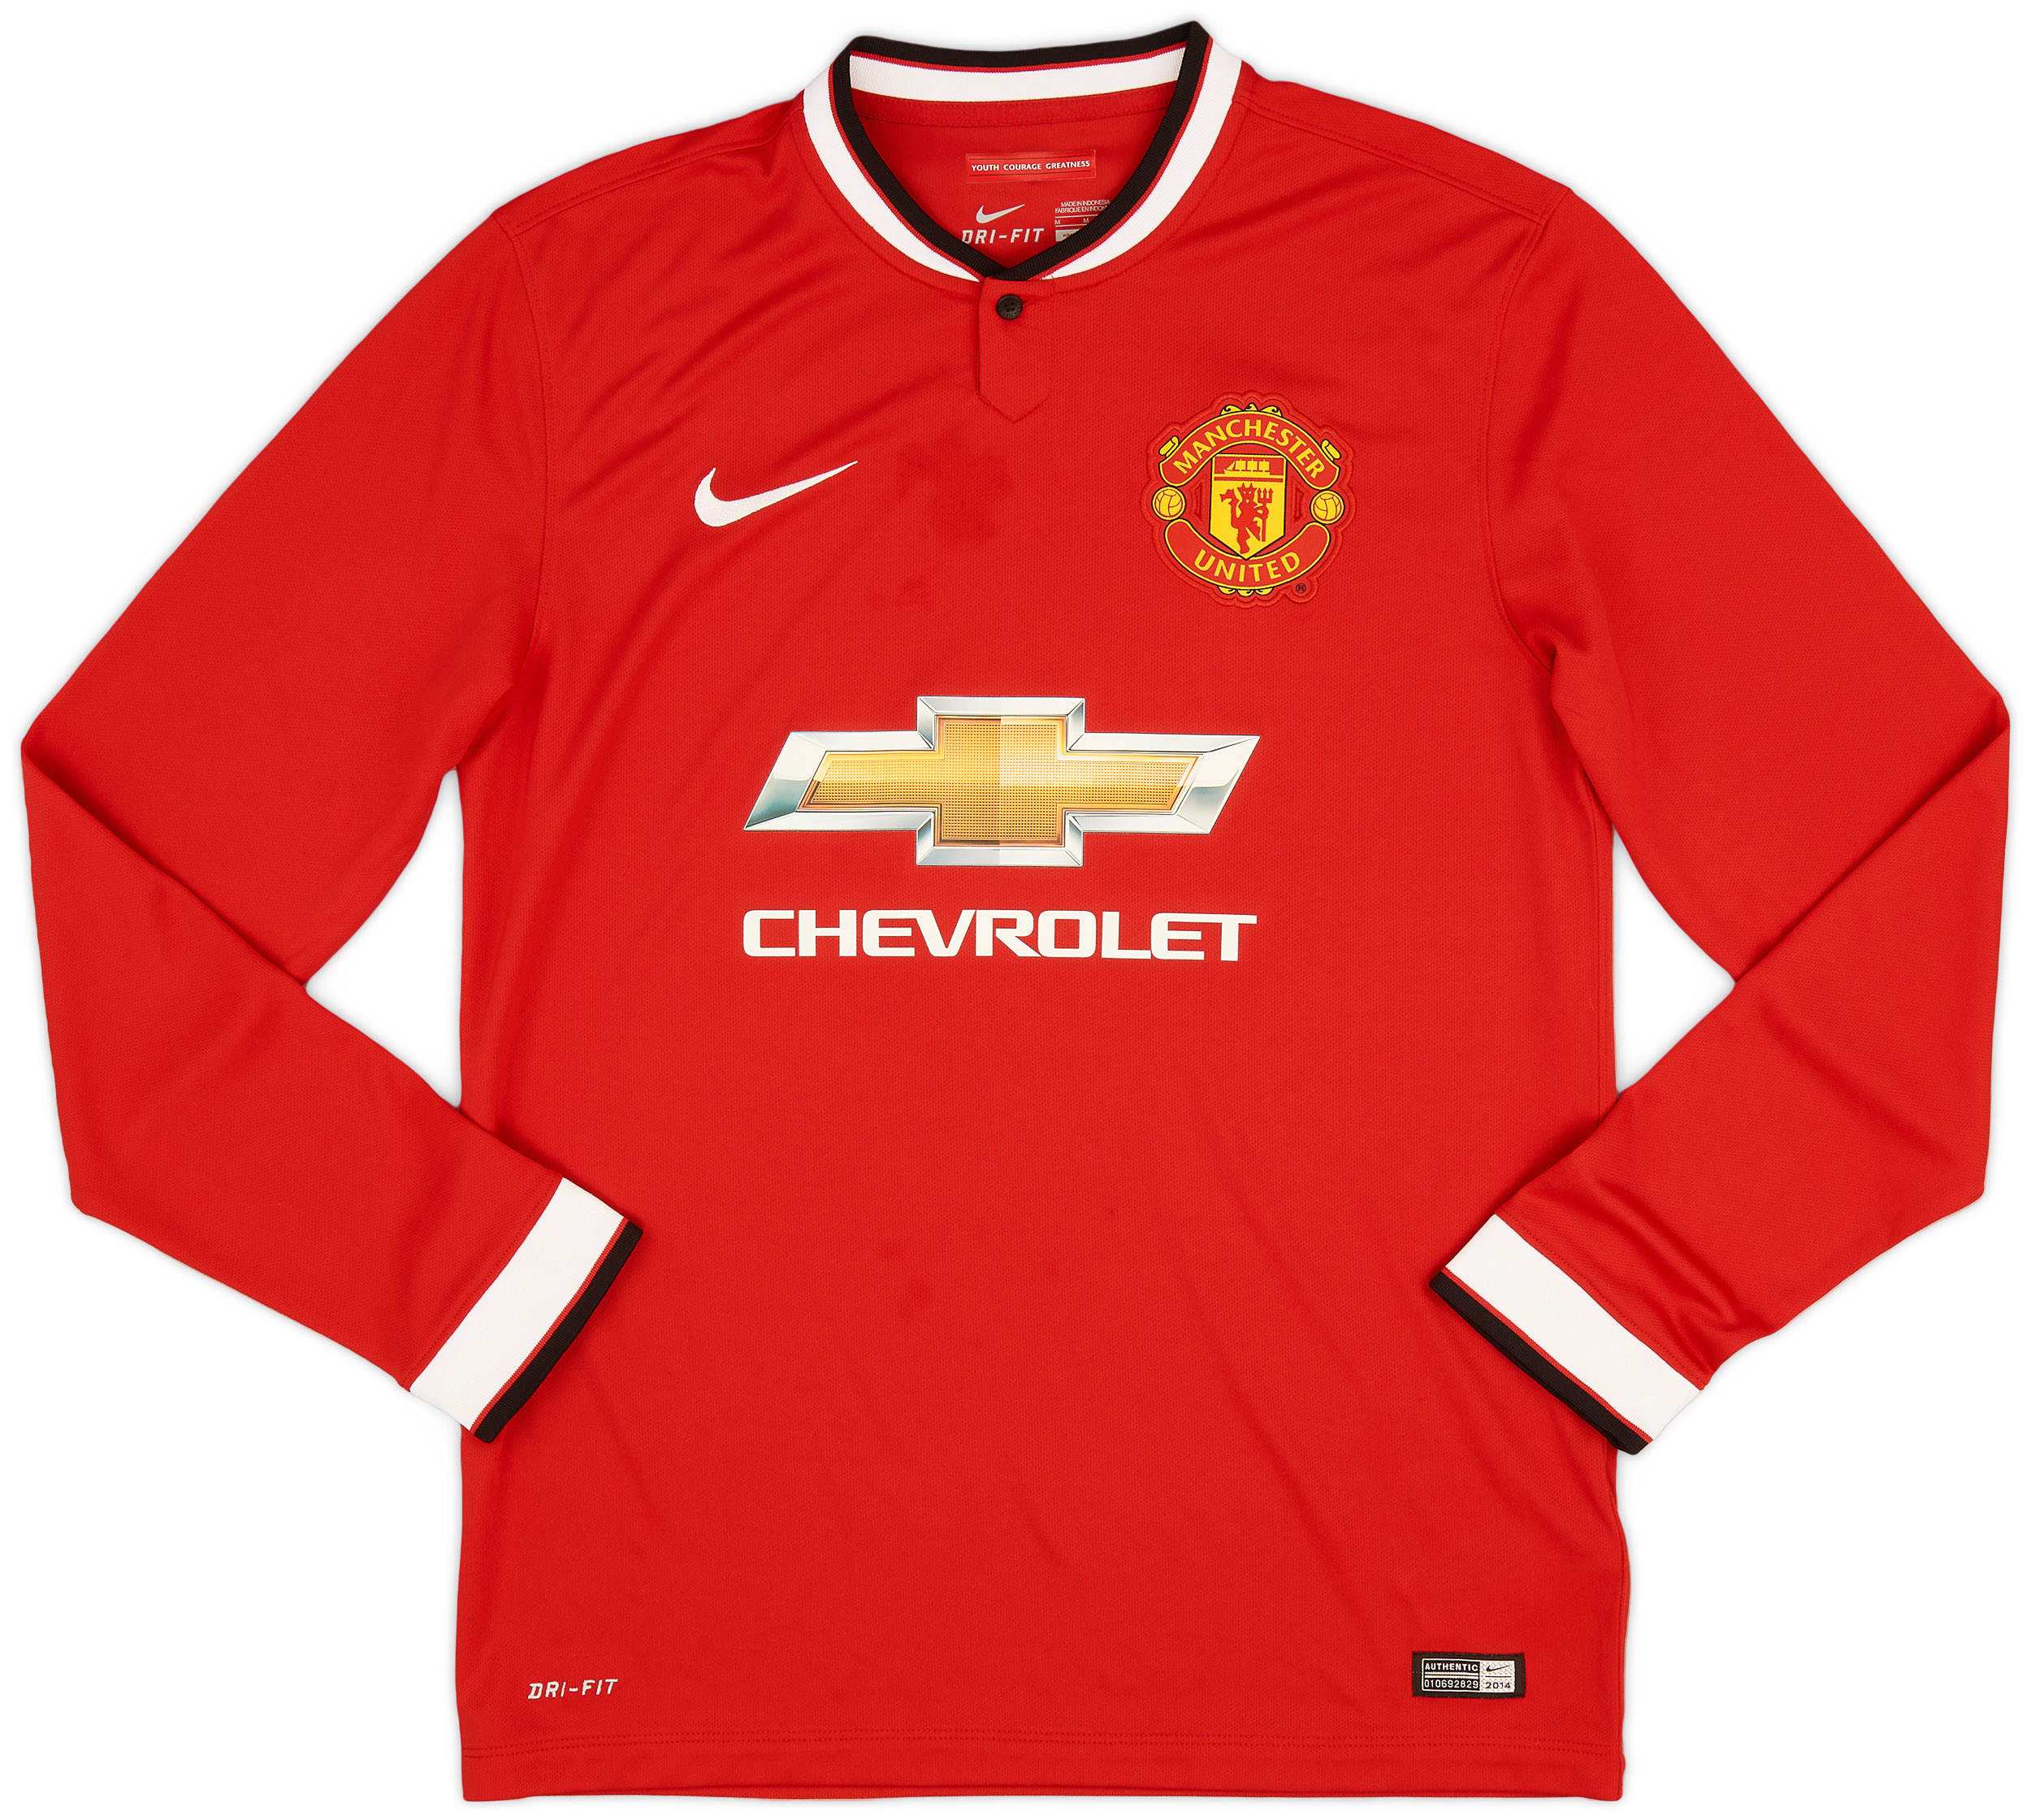 2014-15 Manchester United Home Shirt - 7/10 - ()